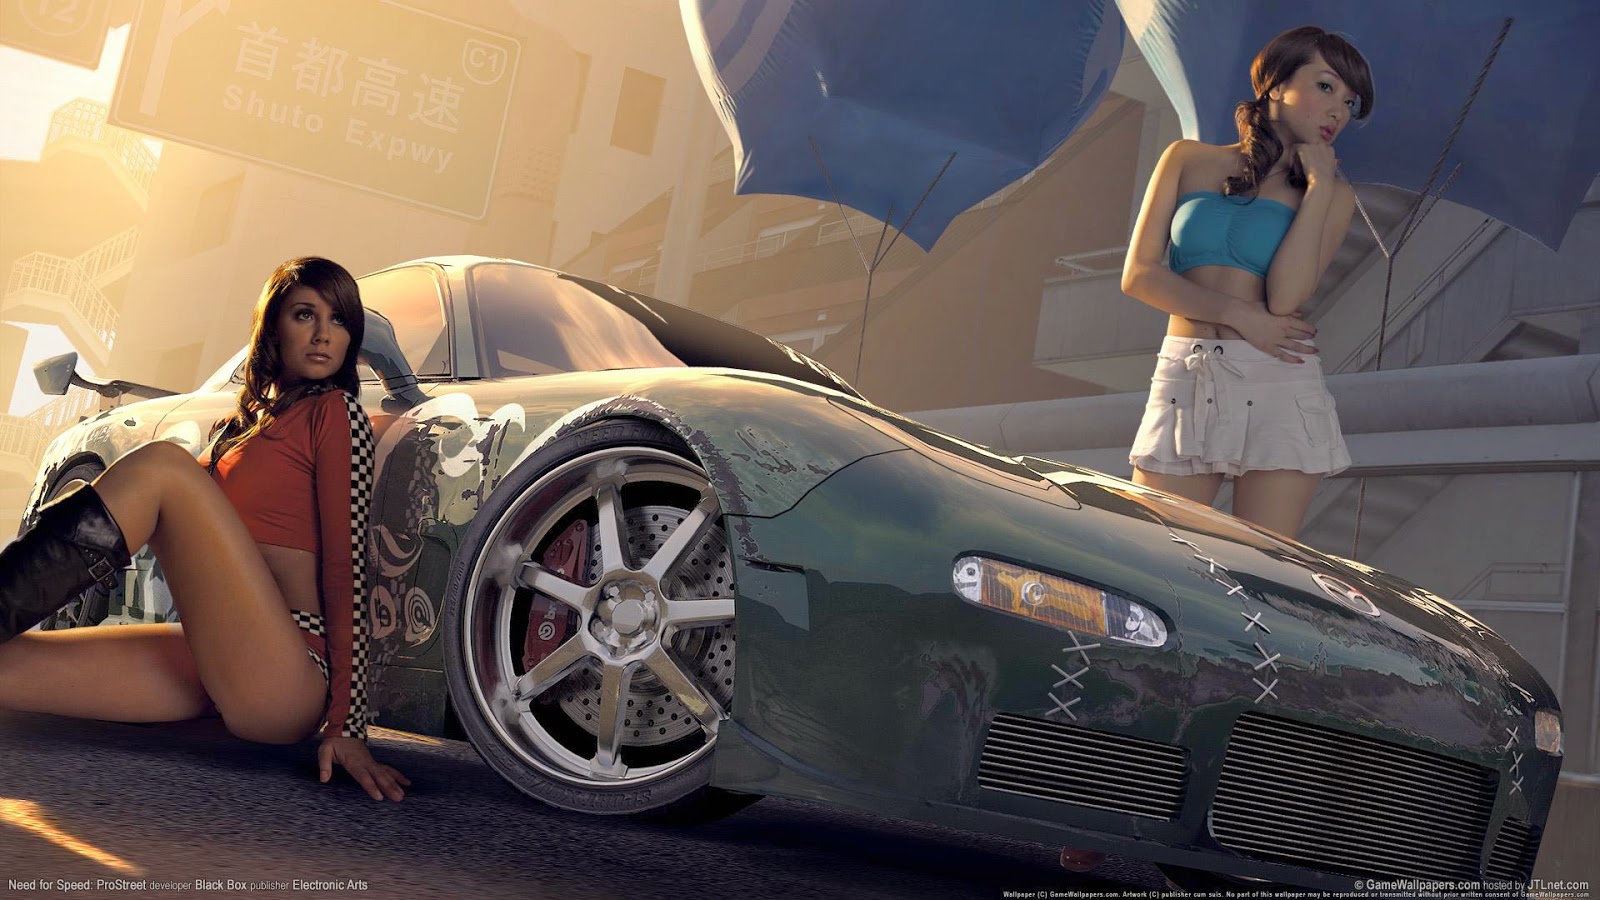 Need For Speed Prostreet Girls 5 Wallpapers Hd